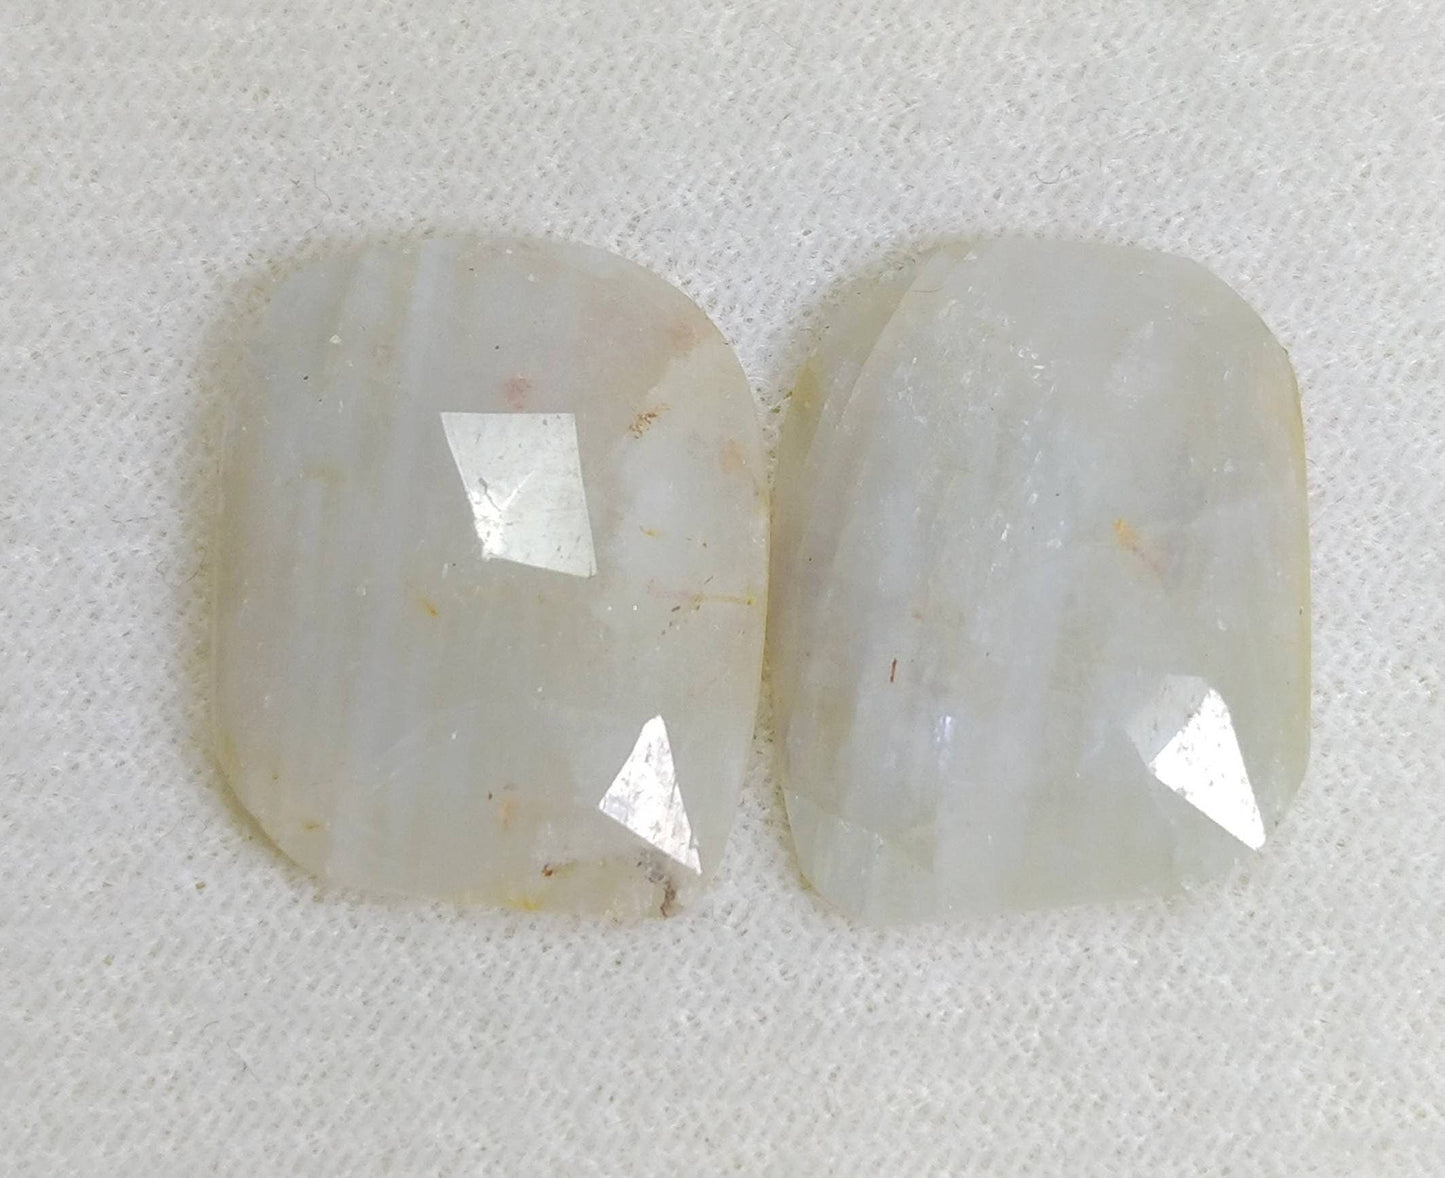 ARSAA GEMS AND MINERALSNatural fine quality aesthetic 33.5 carats rose cut Faceted pair of sapphire cabochons - Premium  from ARSAA GEMS AND MINERALS - Just $30.00! Shop now at ARSAA GEMS AND MINERALS